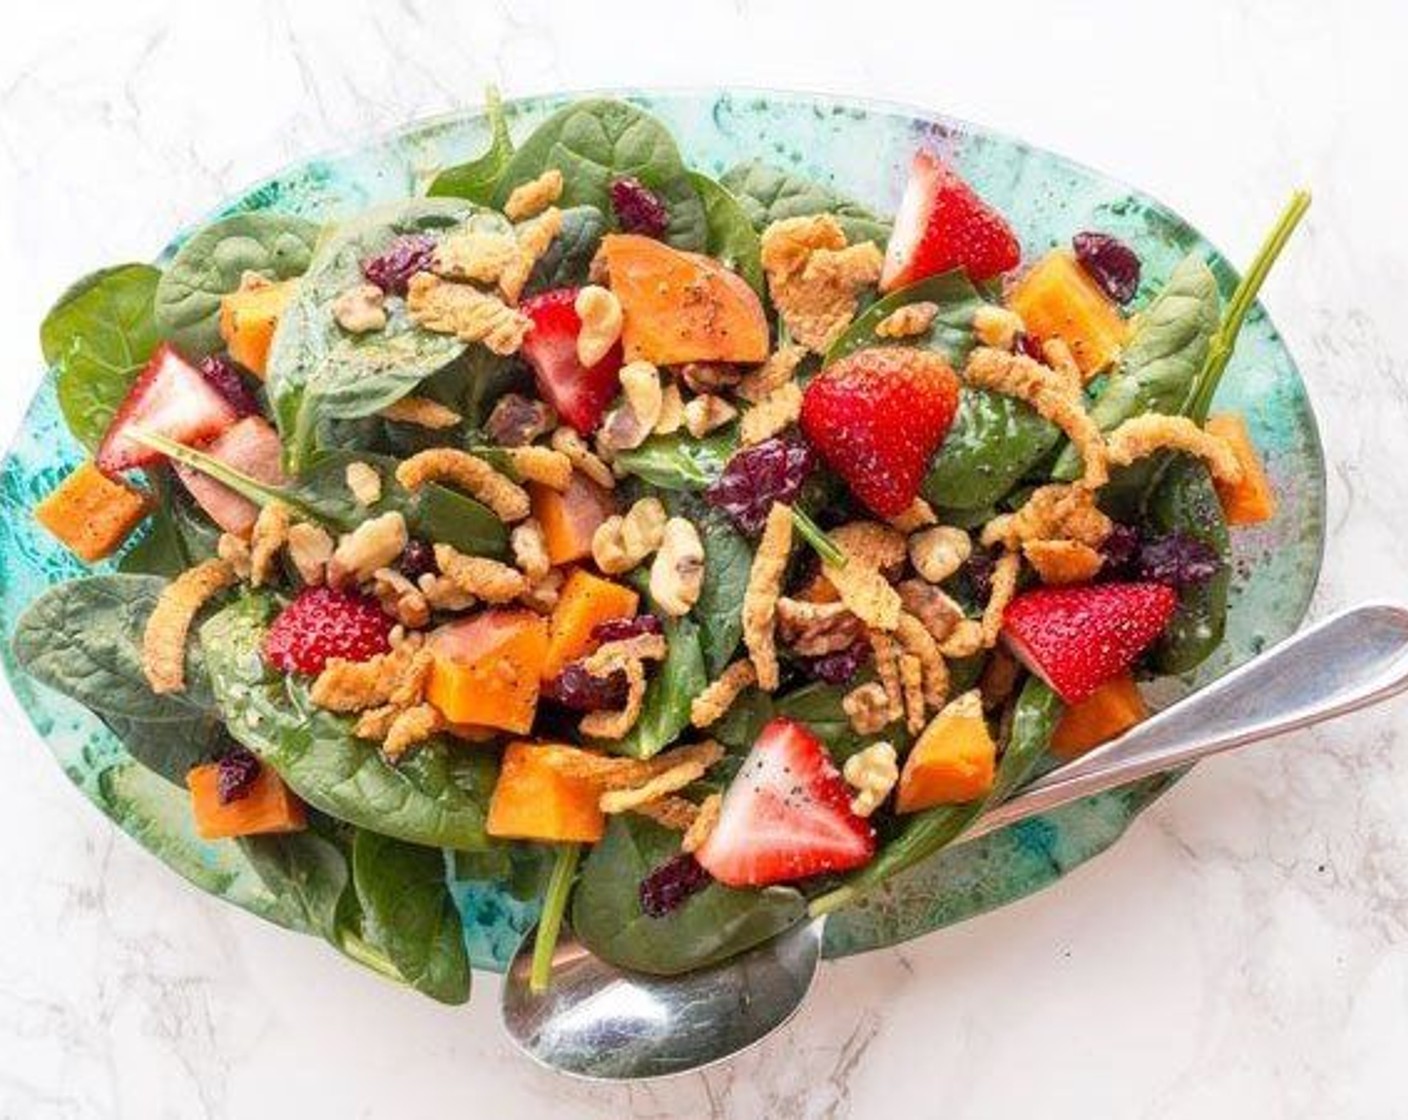 Spinach Salad with Strawberry and Sweet Potato